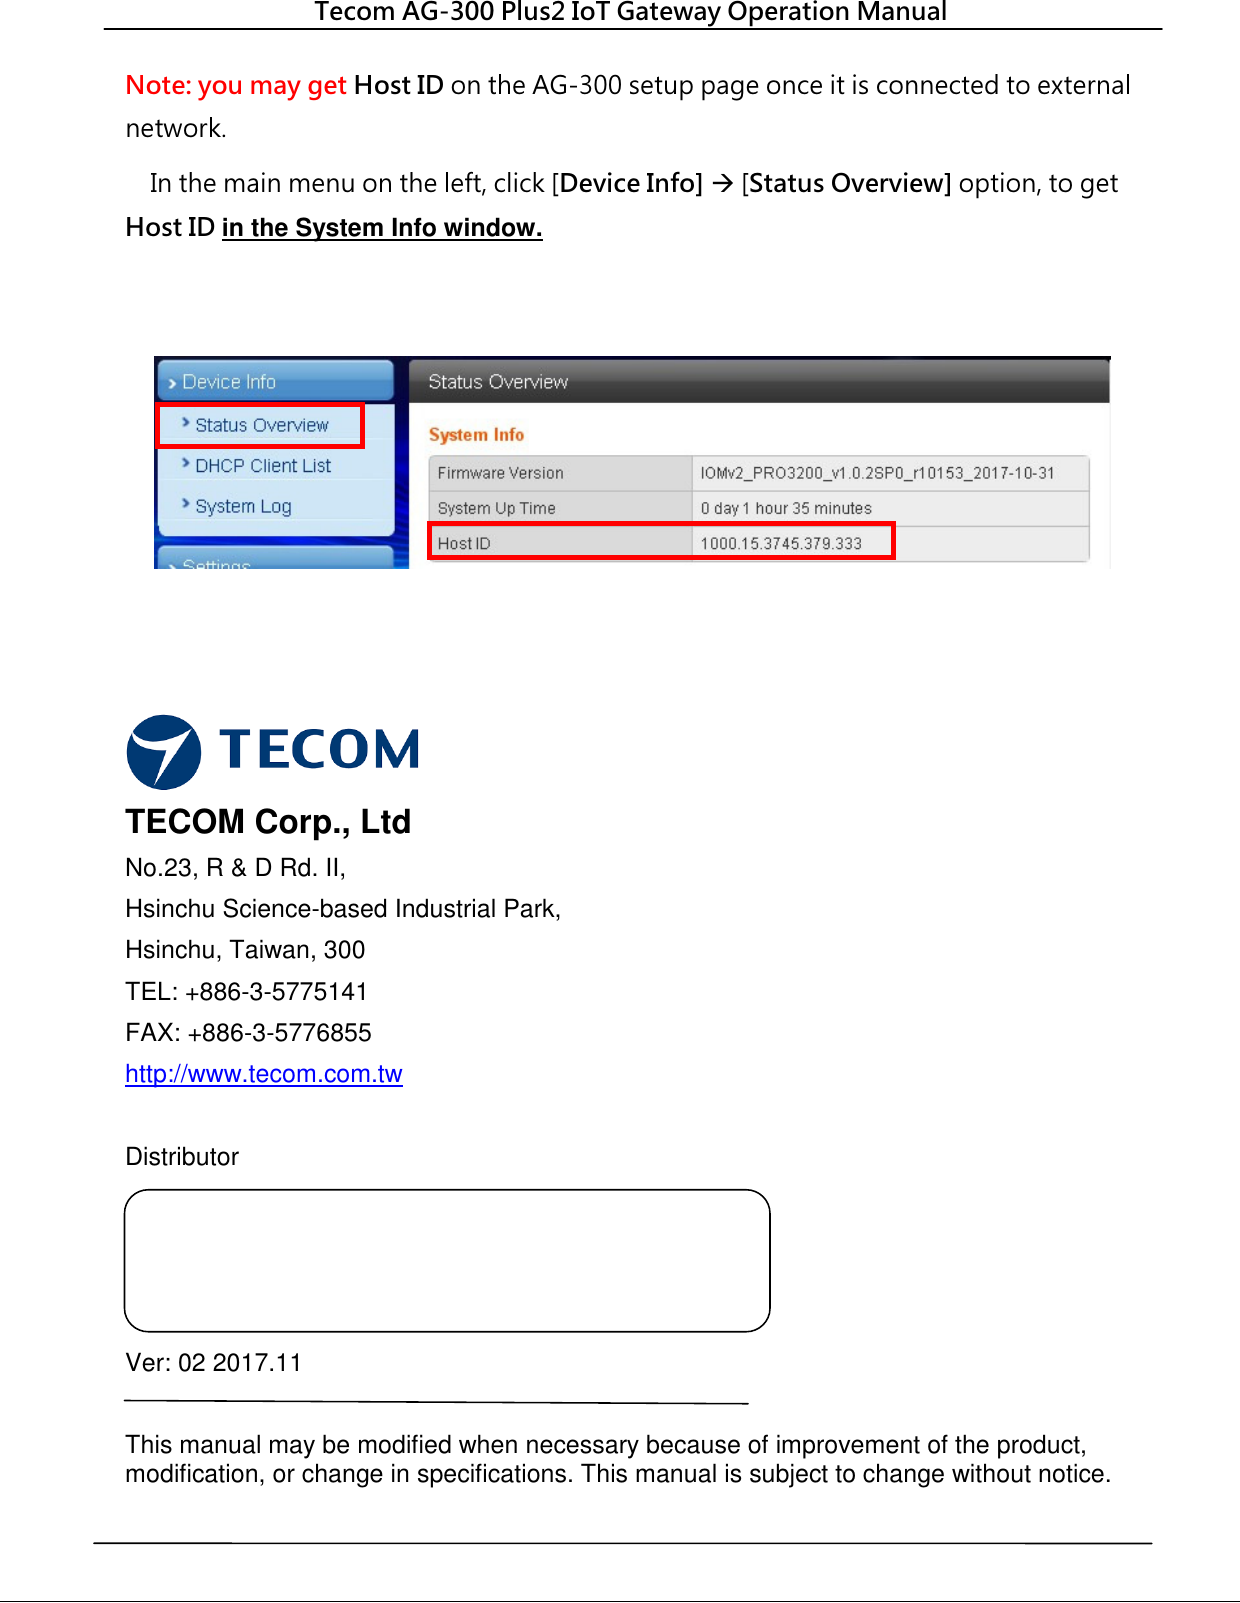  Tecom AG-300 Plus2 IoT Gateway Operation Manual   Note: you may get Host ID on the AG-300 setup page once it is connected to external network.     In the main menu on the left, click [Device Info]  [Status Overview] option, to get Host ID in the System Info window.        TECOM Corp., Ltd No.23, R &amp; D Rd. II,   Hsinchu Science-based Industrial Park, Hsinchu, Taiwan, 300 TEL: +886-3-5775141 FAX: +886-3-5776855 http://www.tecom.com.tw  Distributor     Ver: 02 2017.11  This manual may be modified when necessary because of improvement of the product, modification, or change in specifications. This manual is subject to change without notice. 